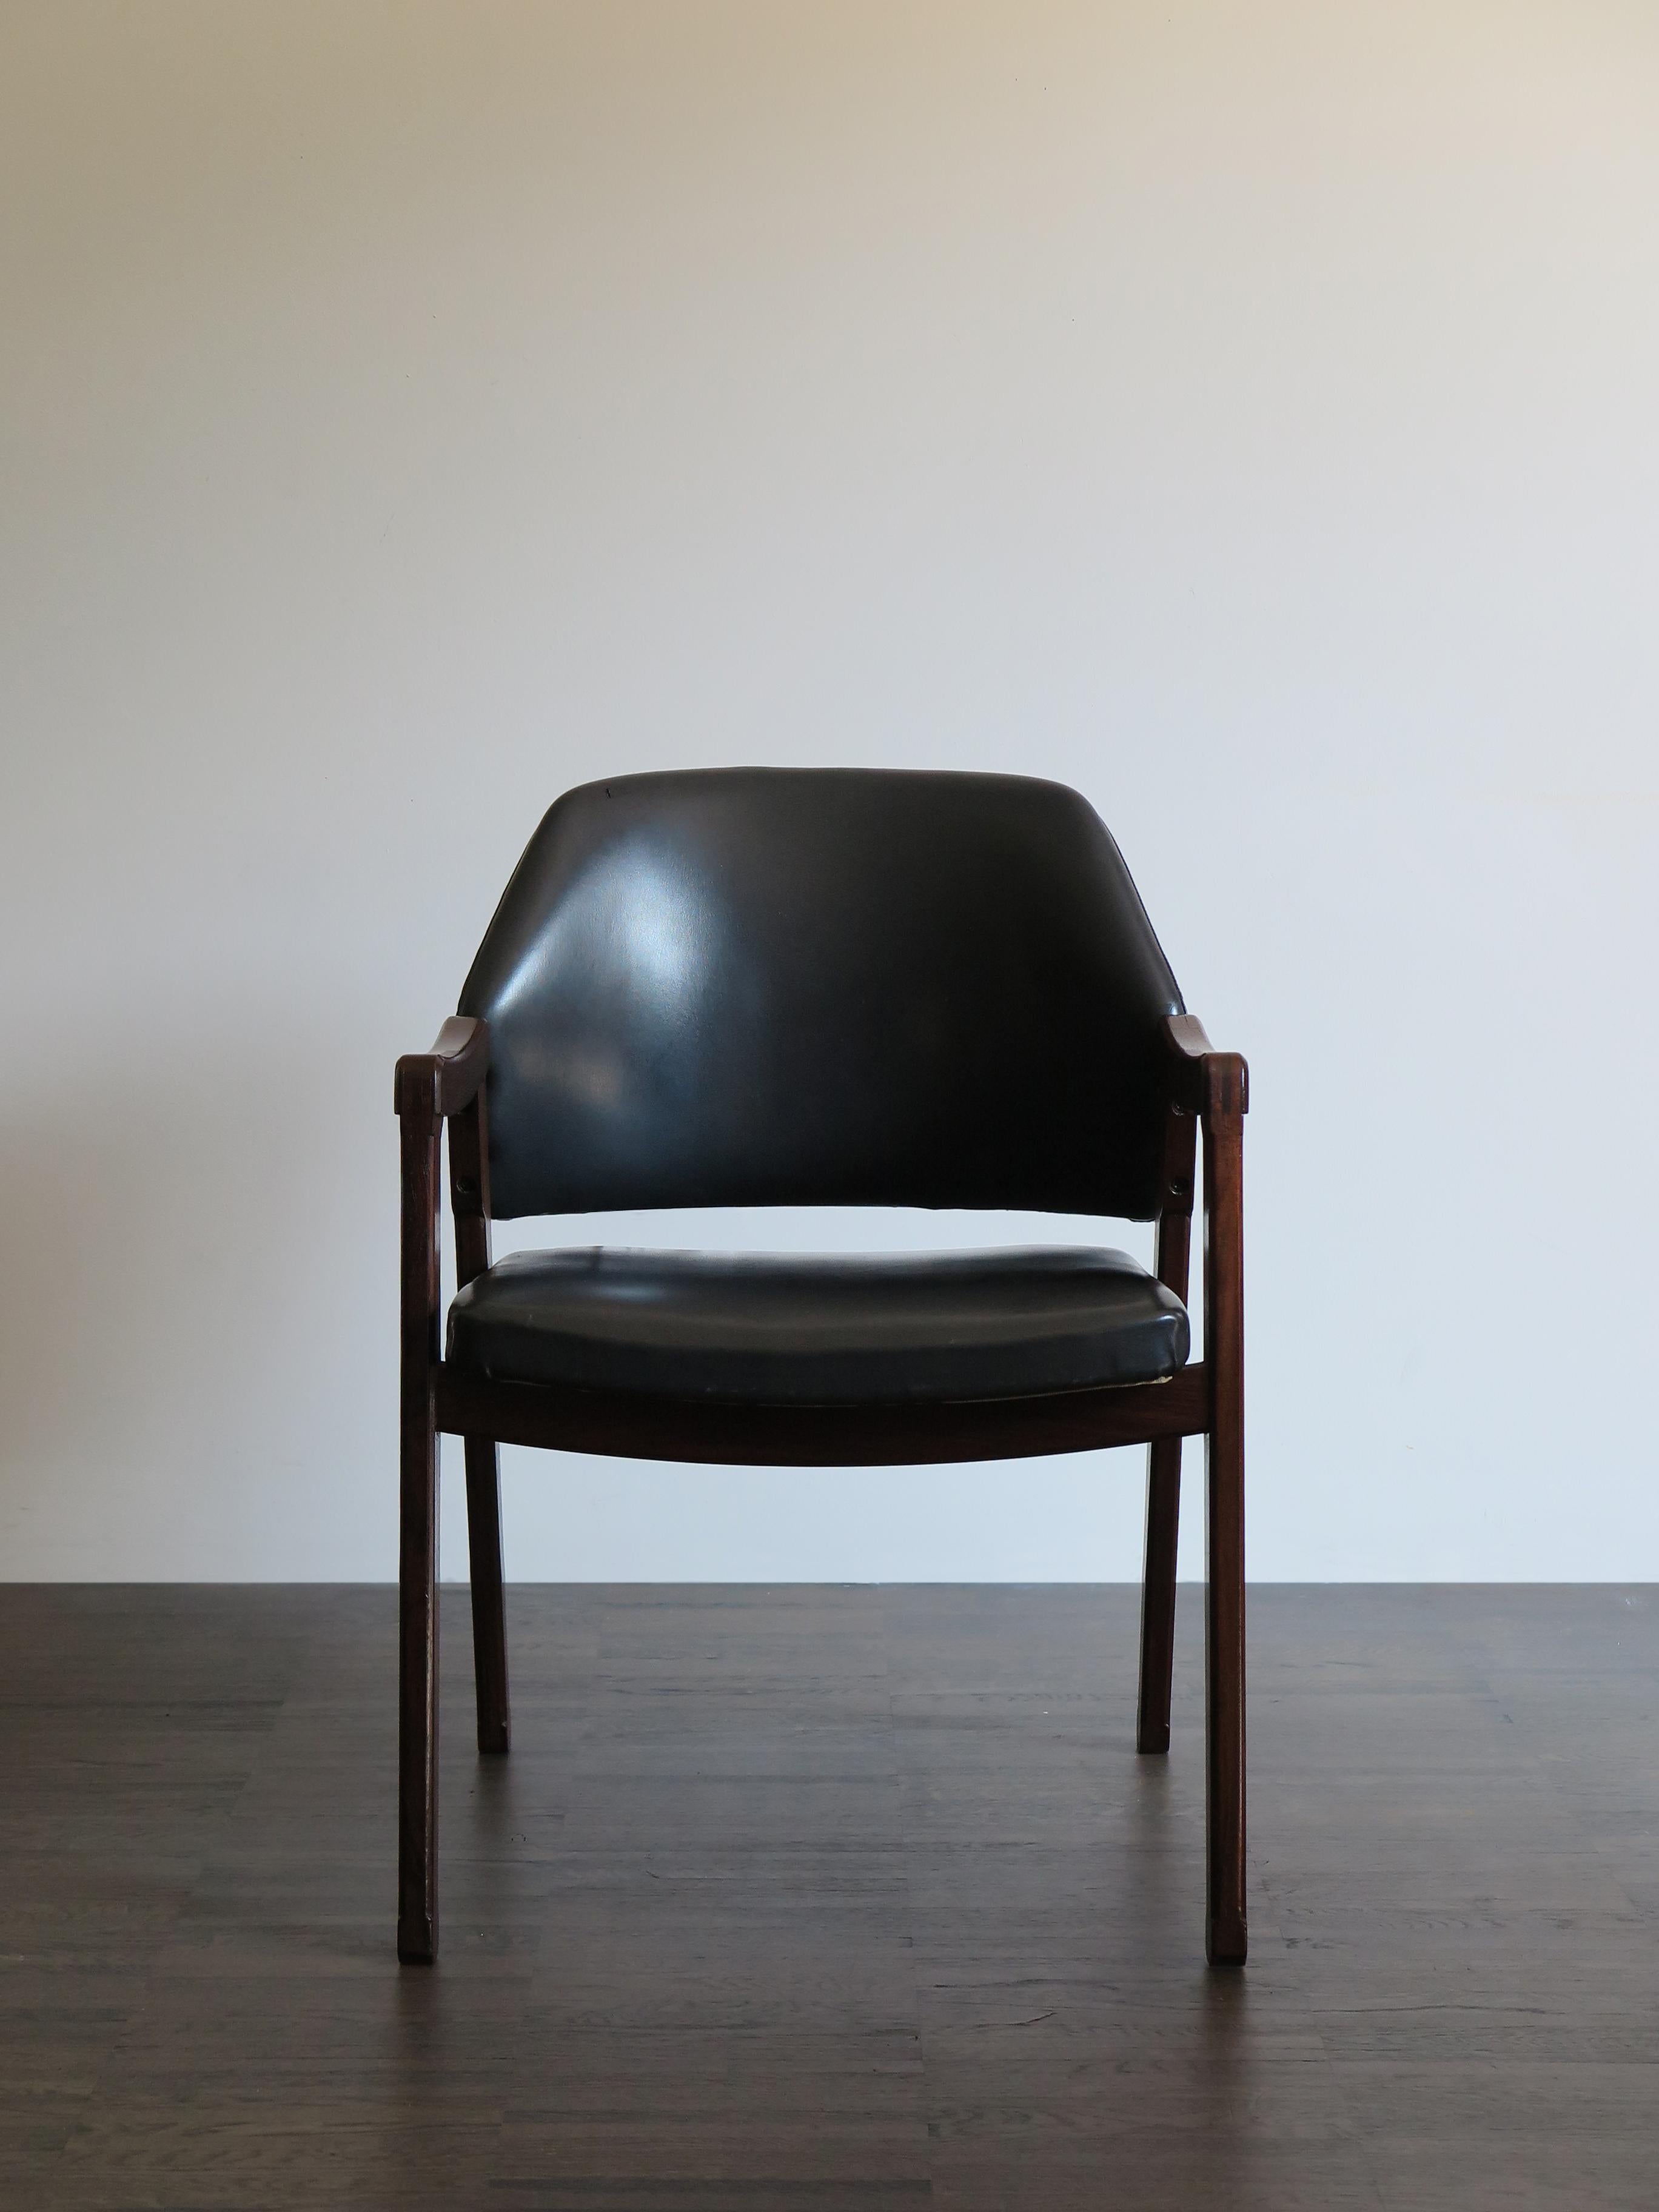 Italian Mid-Century Modern design rare and famous armchair model 814 designed by Ico Parisi for Cassina in 1961, solid dark wood structure and original skai covering.

Please note that the item is original of the period and this shows normal signs